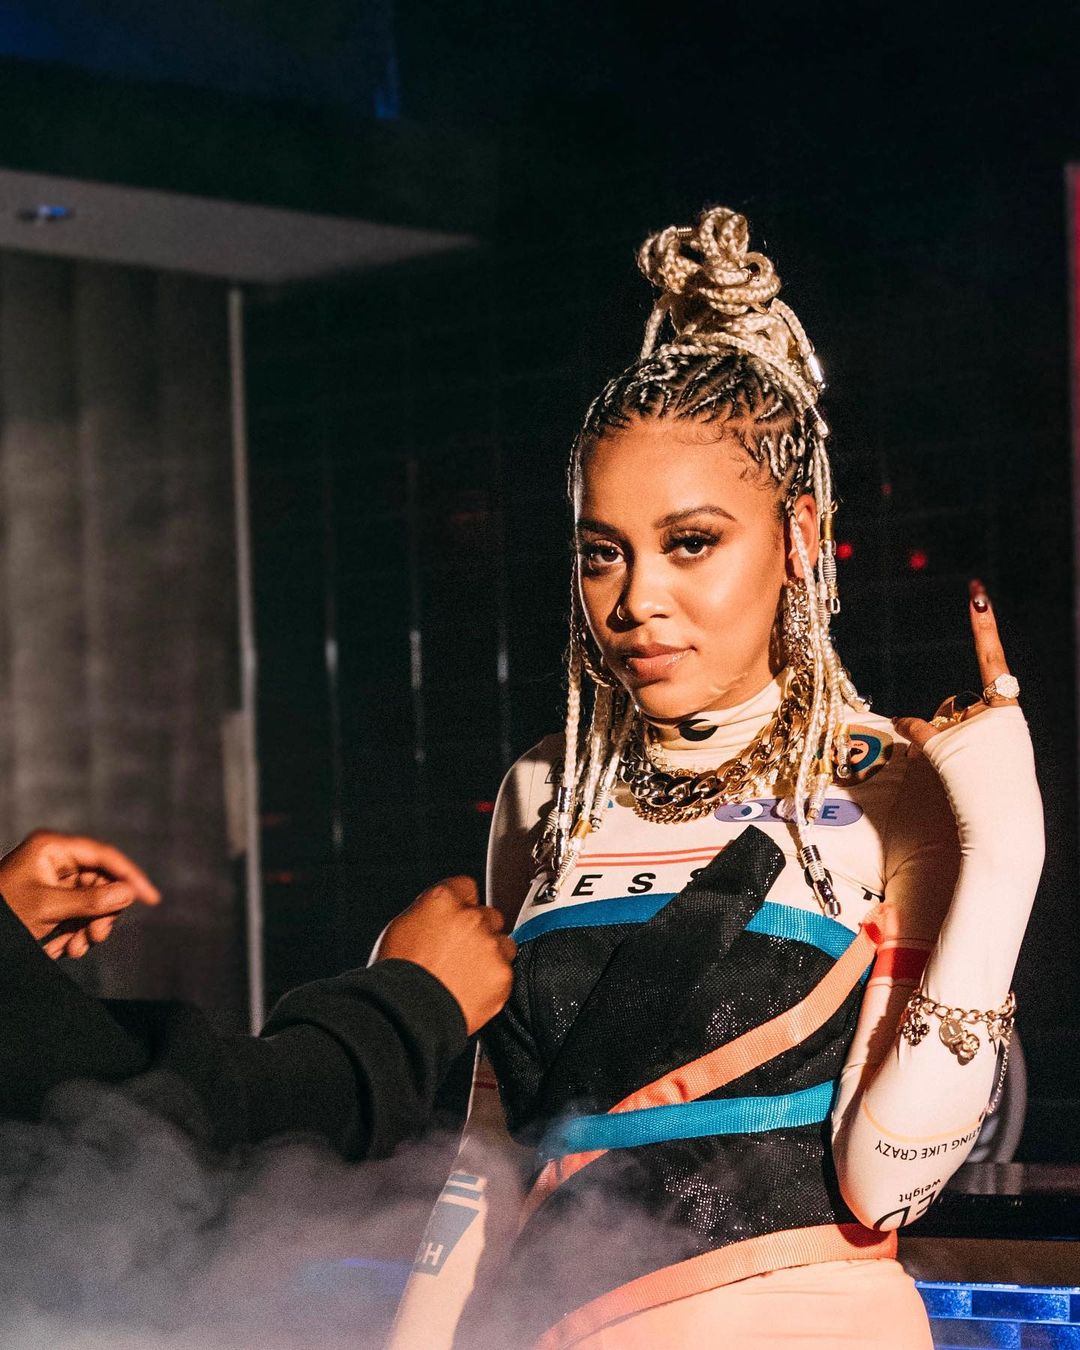 Sho Madjozi featured as a fashionable African female artiste